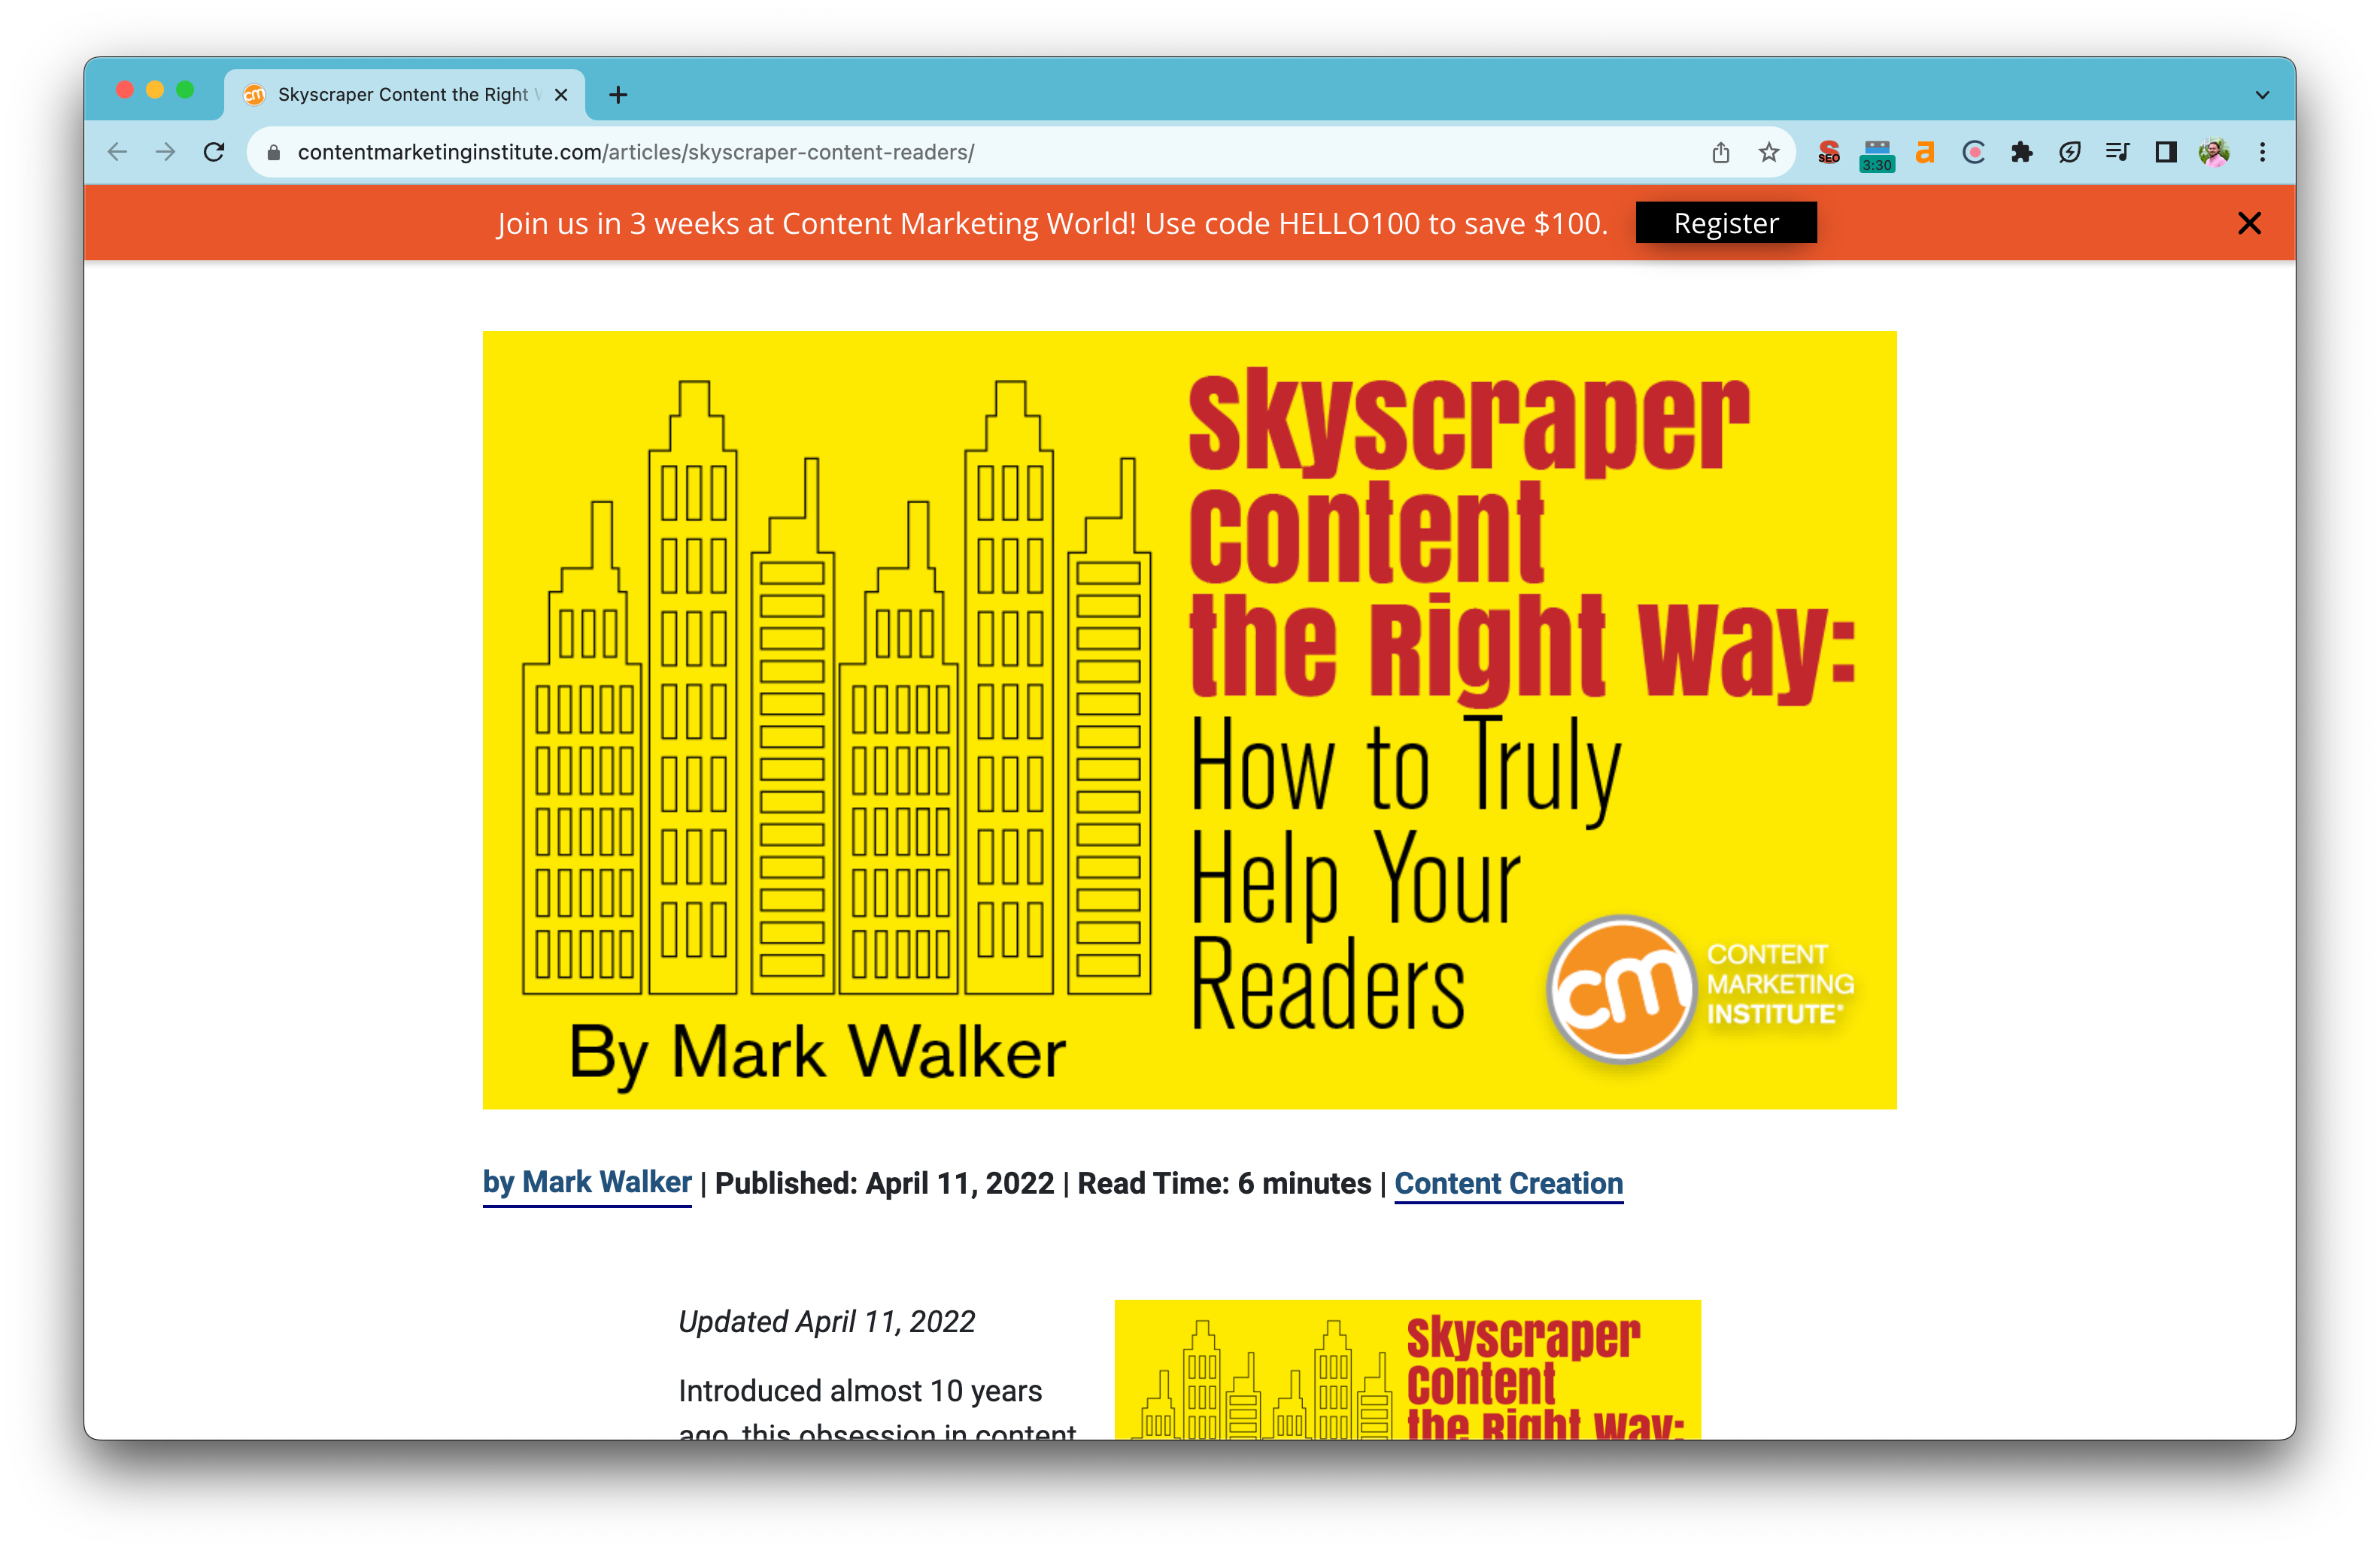 Screenshot of article: Content Marketing Institute: Skyscraper Content the Right Way: How to Truly Help Your Readers